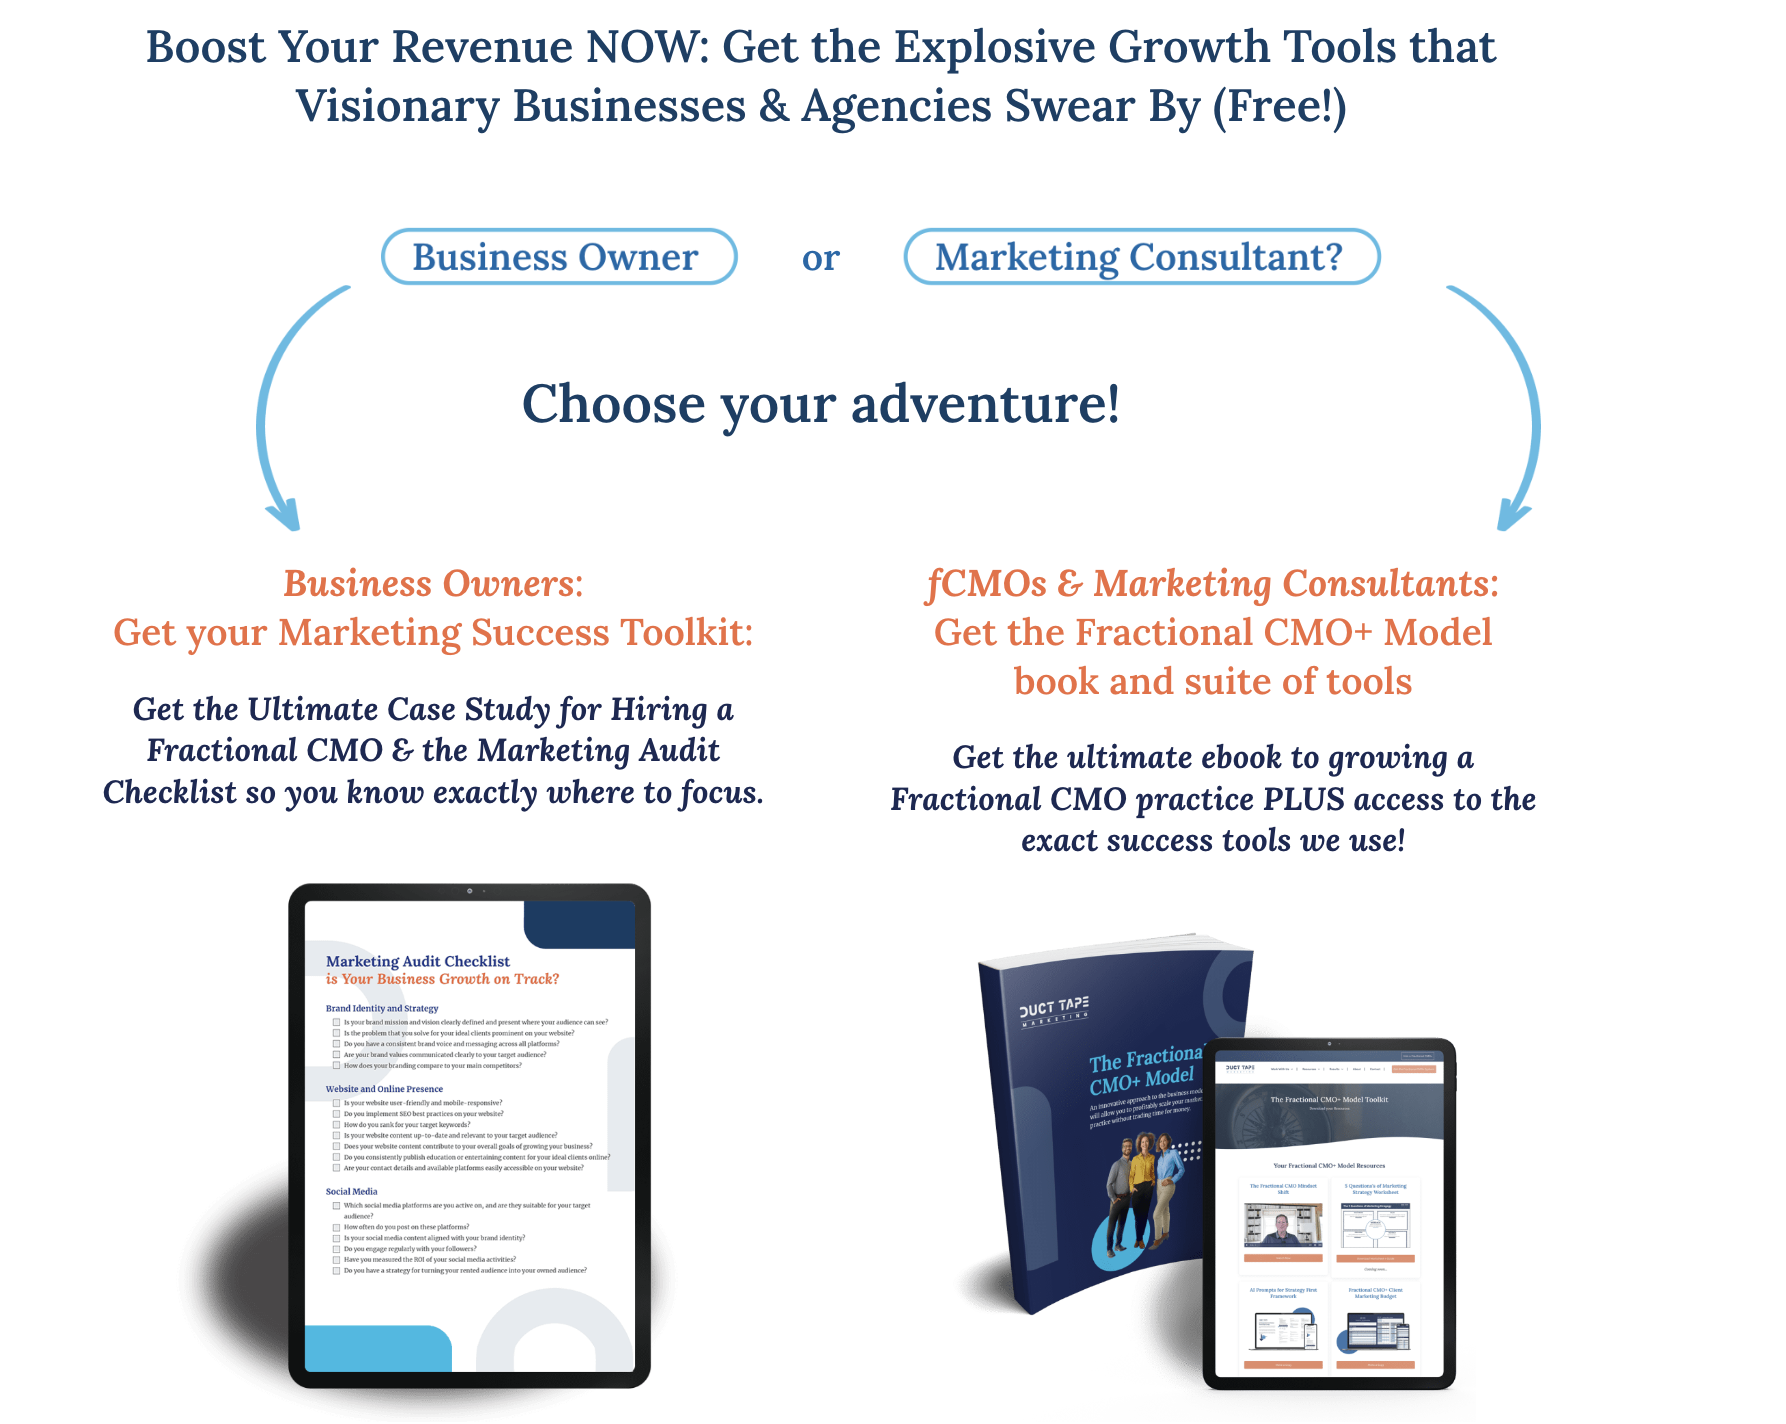 Free Marketing Strategy and Fractional CMO growth tools